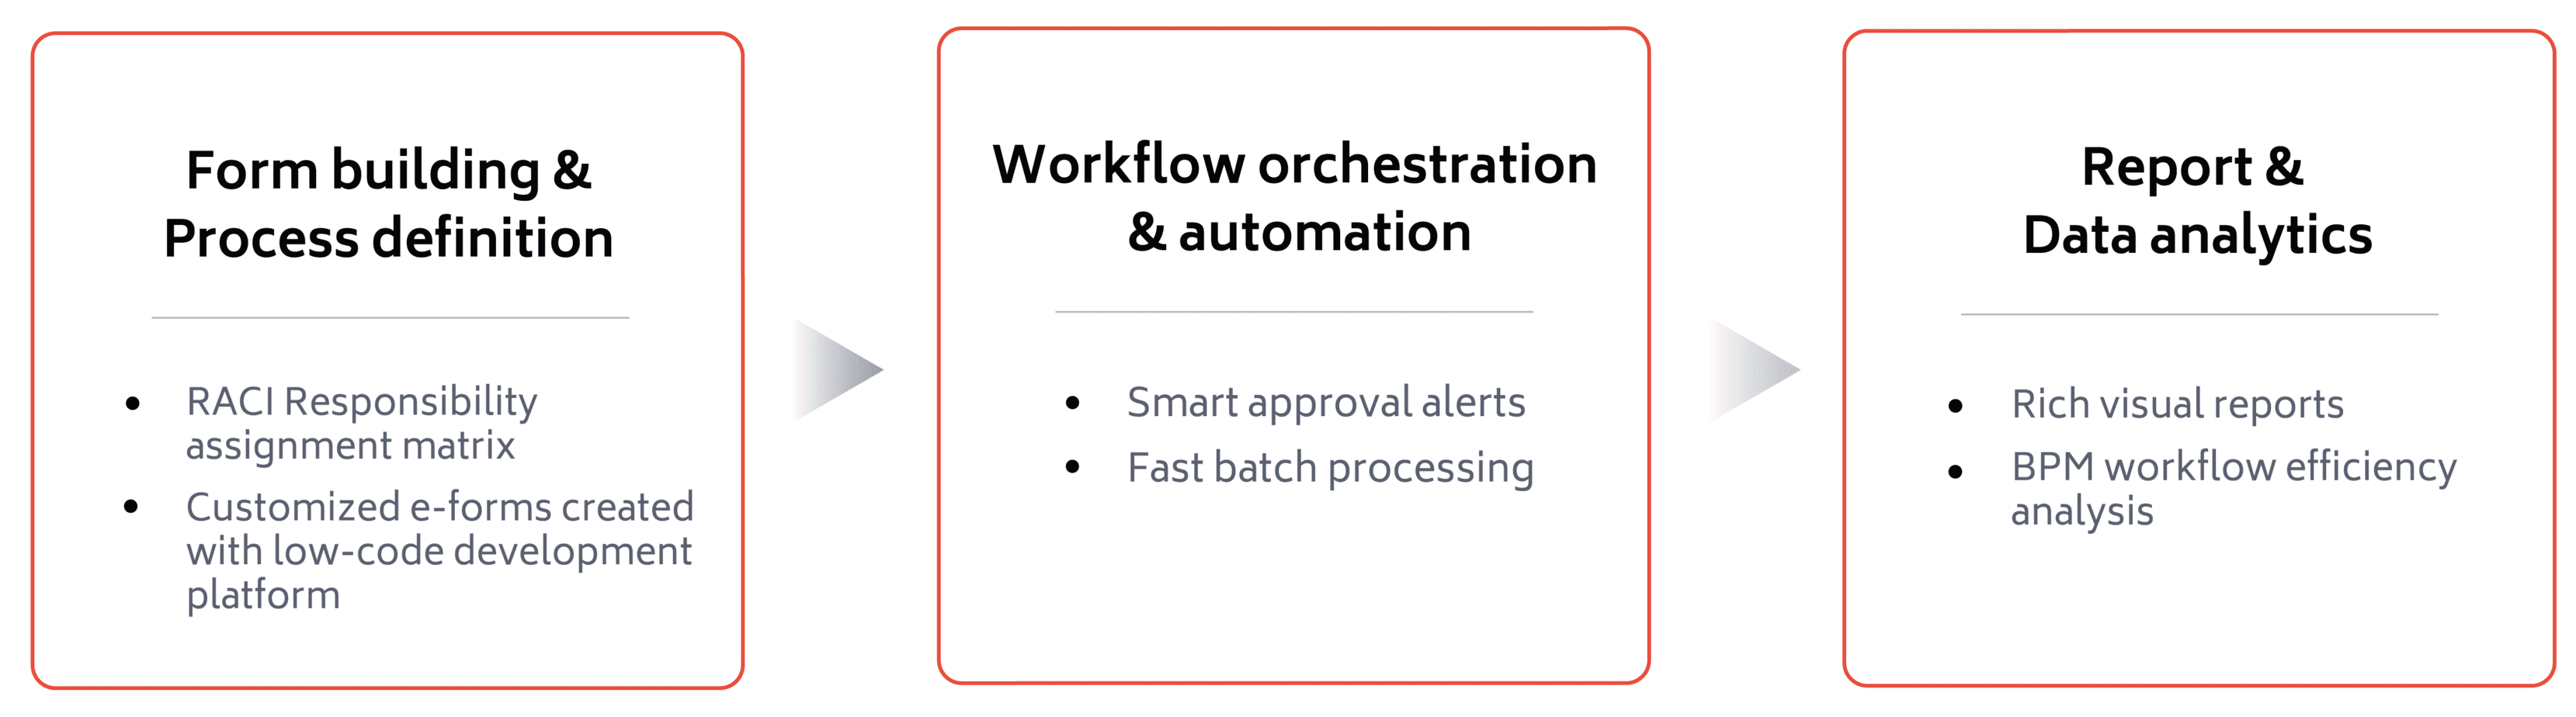 approval-workflow-form-building-process-definition-workflow-orchestration-automation-report-data-analytics